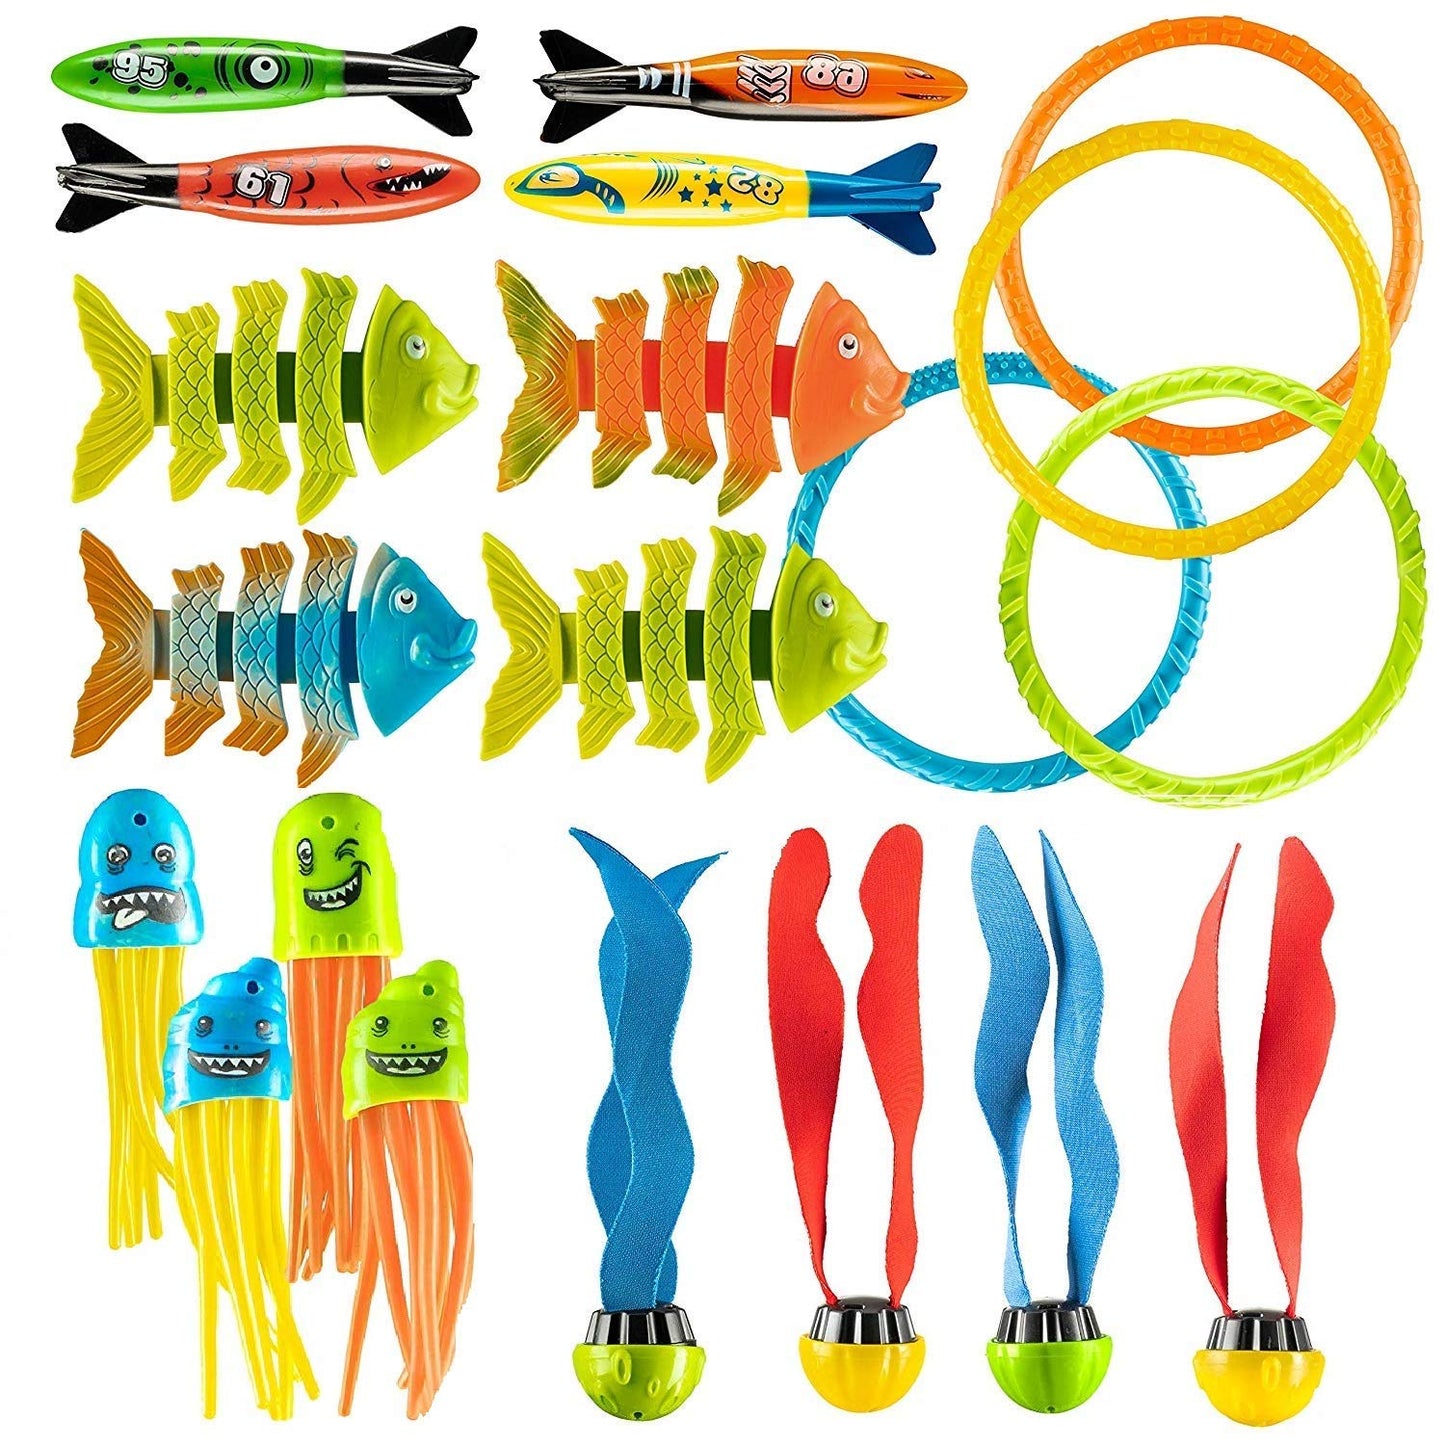 PREXTEX Pool Diving Toys, 24pcs | Kids Swimming Pool Toys, Toddler/Kids Pool Toys, Swim Toys, Pool Dive Toys | Pool Games for Kids | Diving Toys for Pool for Kids, Toddlers, Adults, Family, All Ages